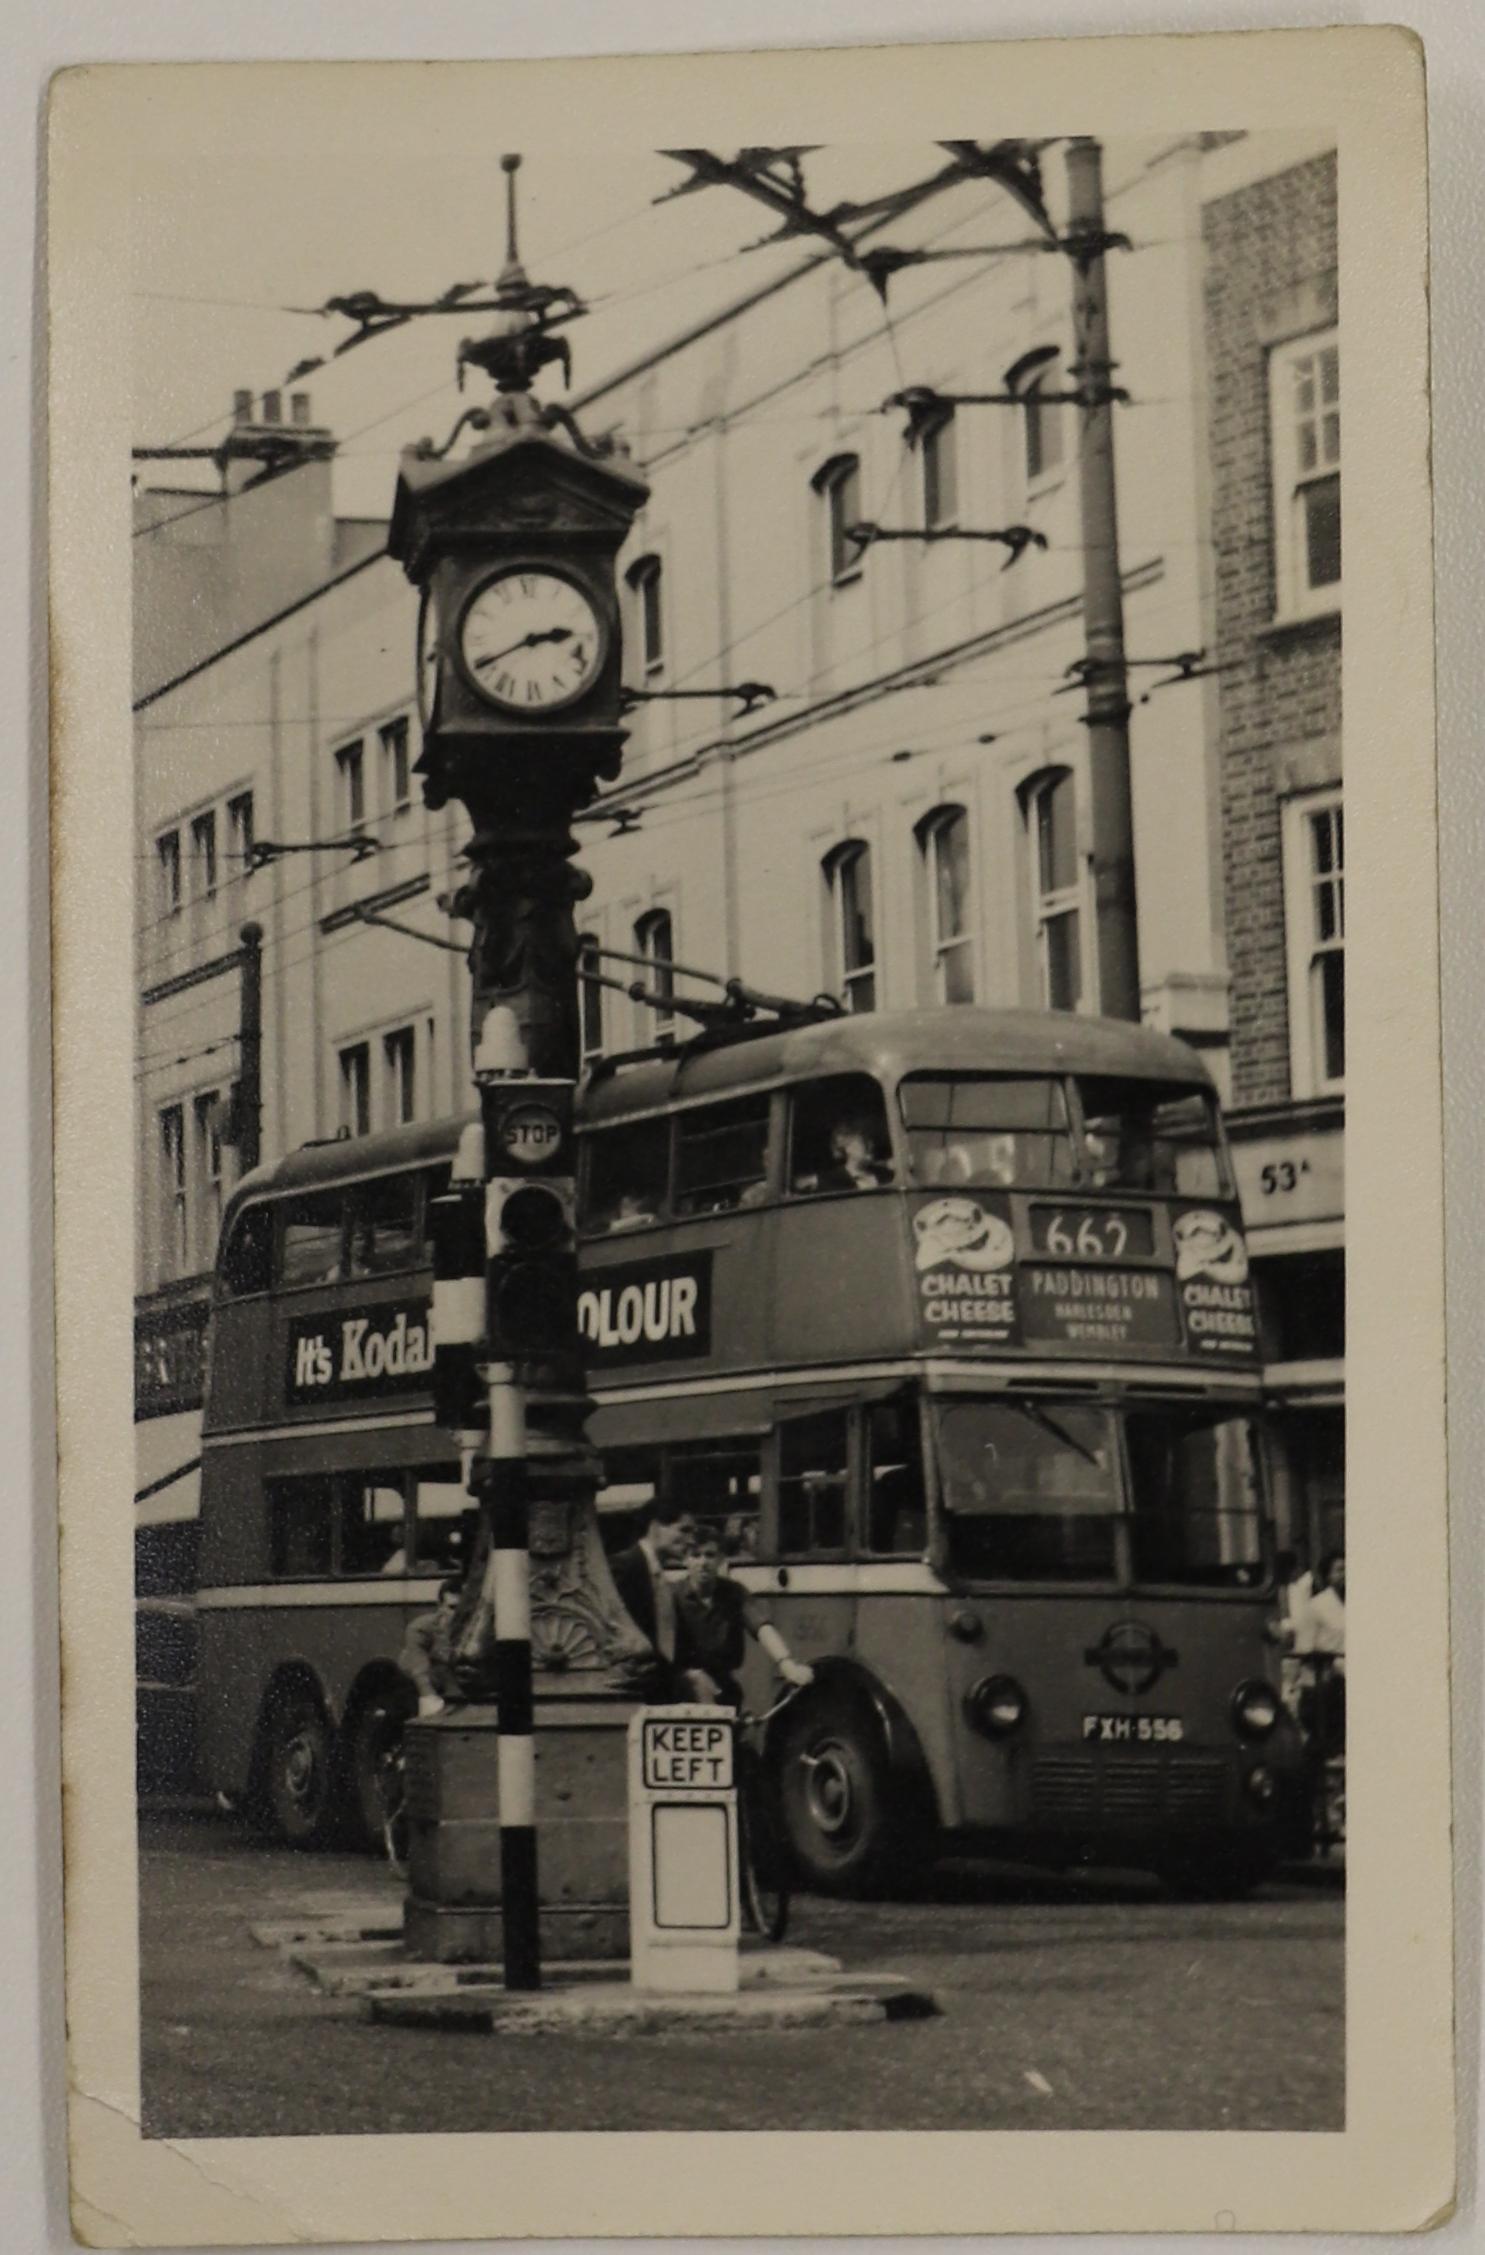 Postcard featuring a black and white image of an historic clock with a tram, number ‘662’ to Paddington, behind it.